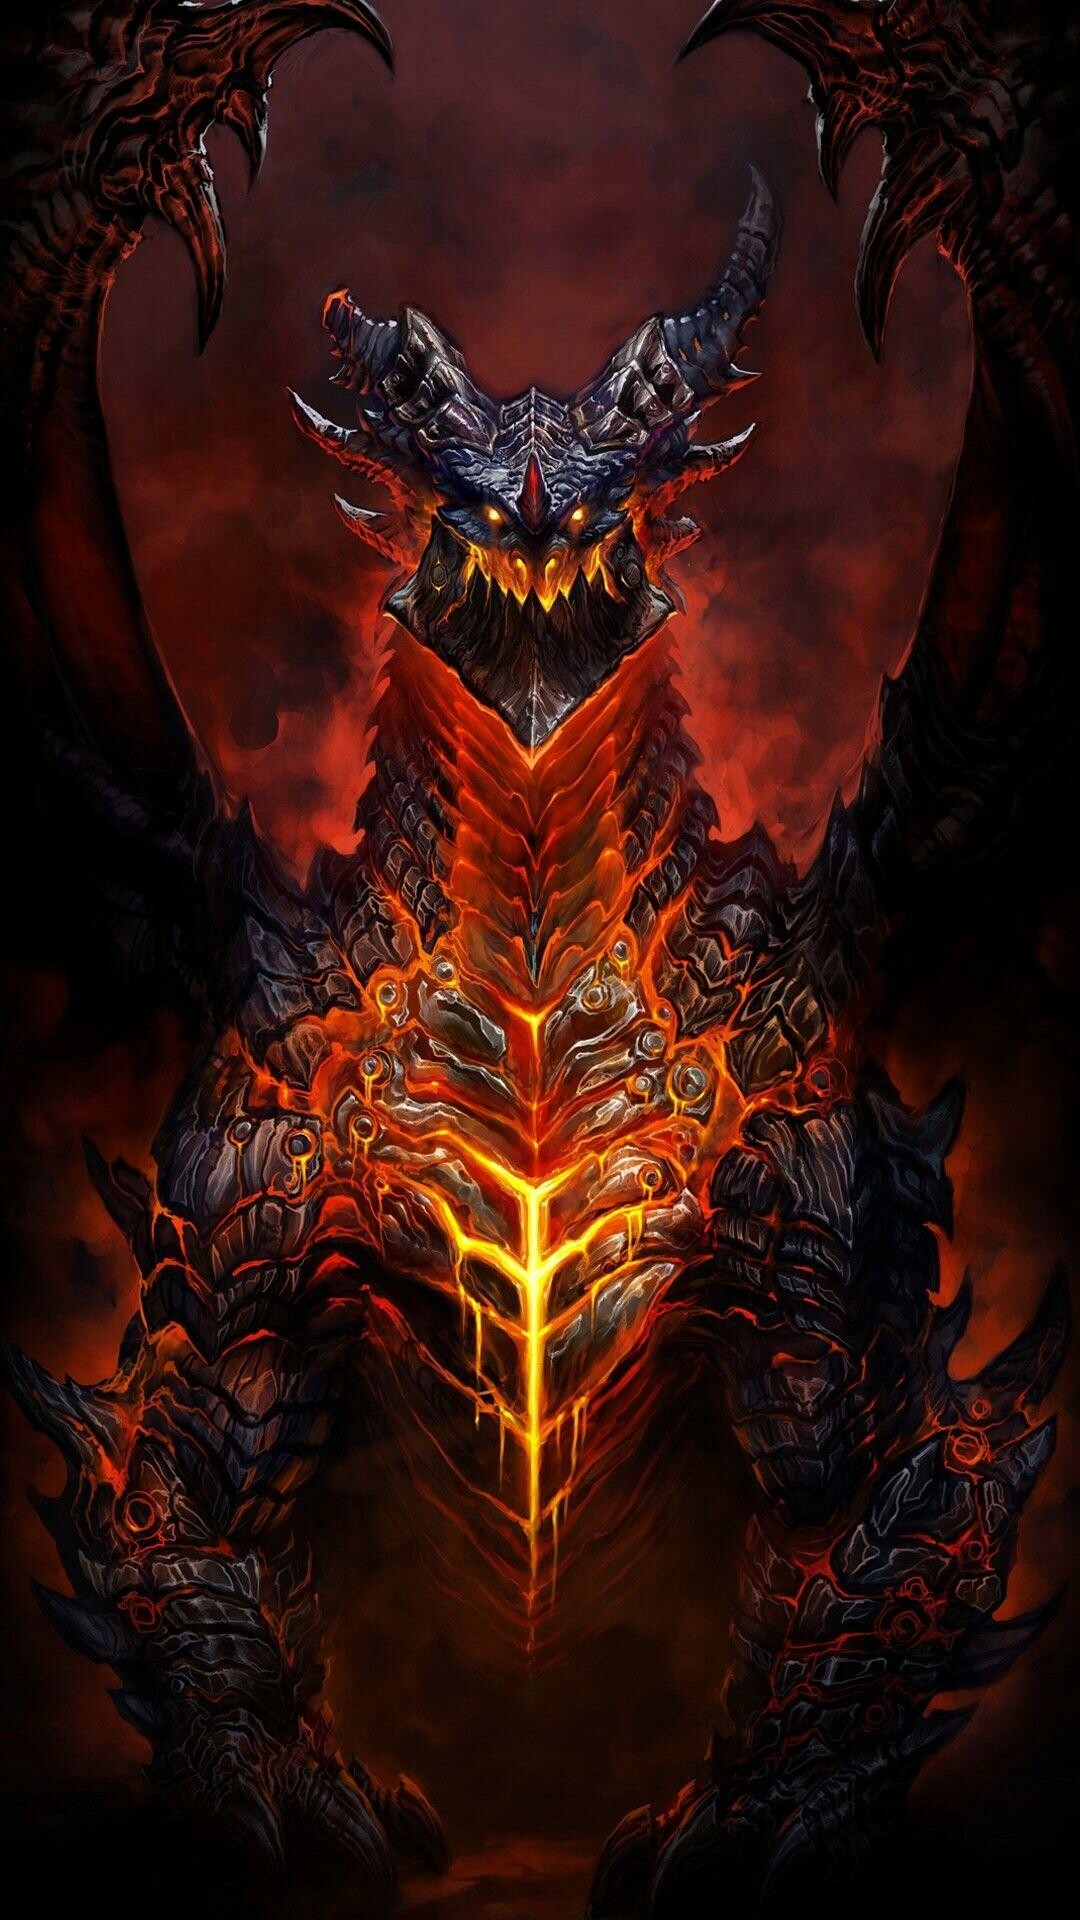 World of Warcraft: Deathwing, One of the five Dragon Aspects. 1080x1920 Full HD Background.